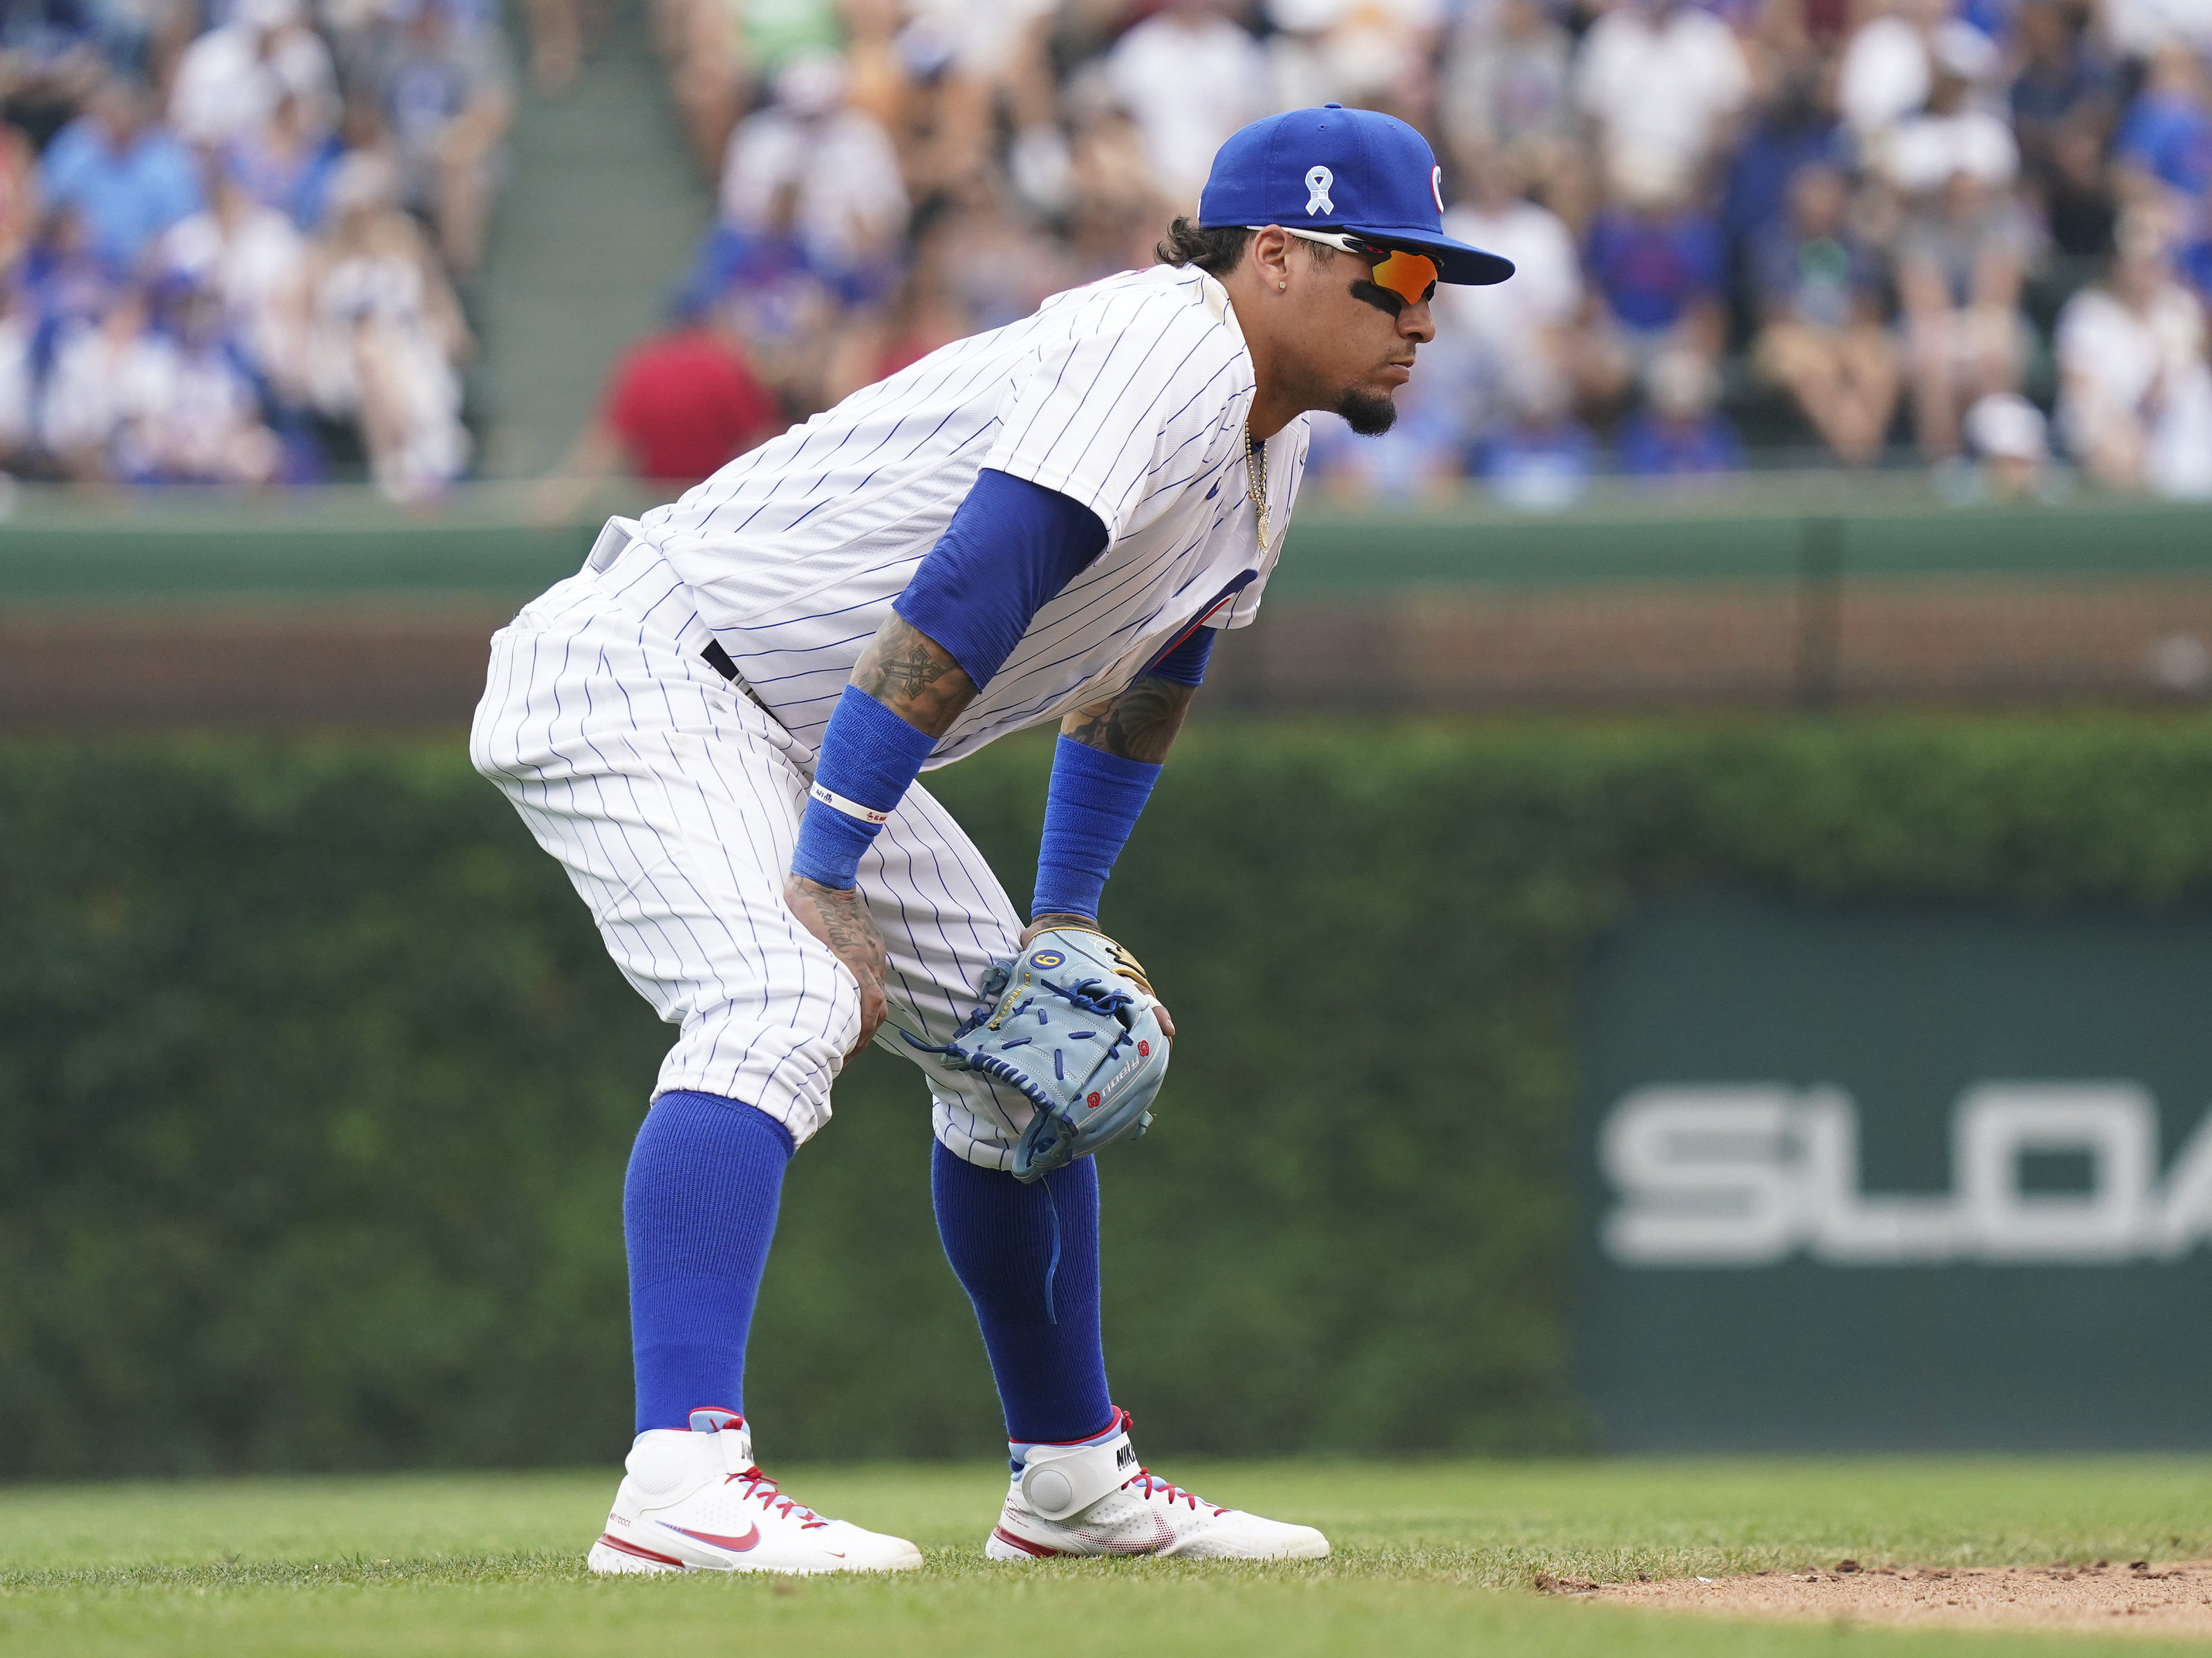 Cubs News: 3 players will be National League All-Stars